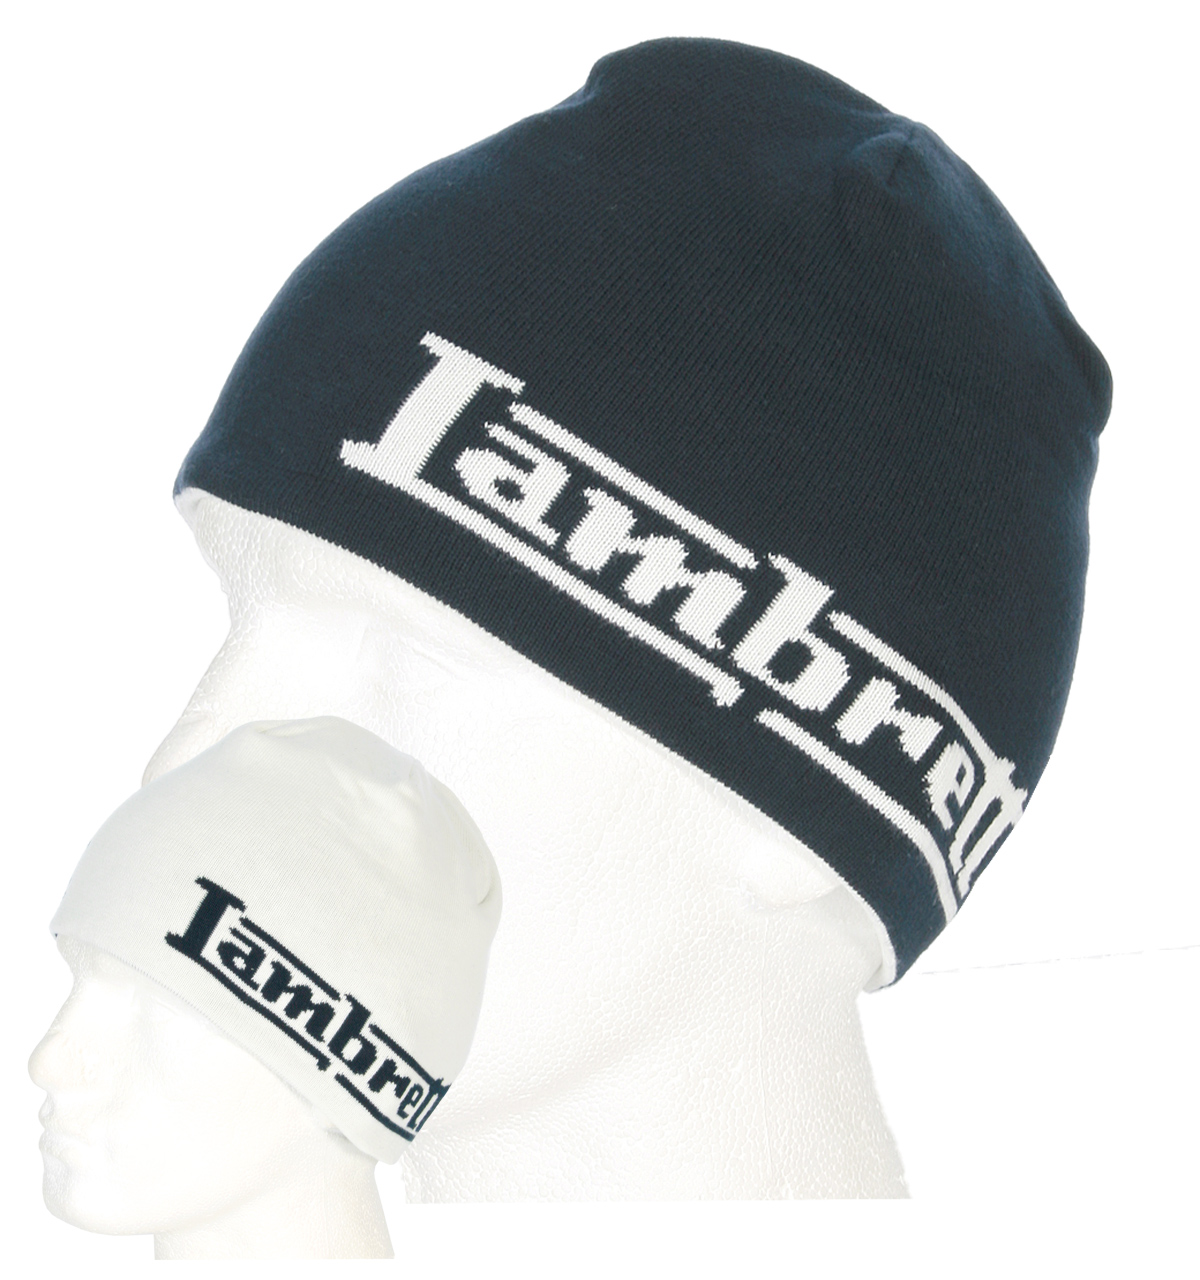 Navy and White Reversible Beanie Hat